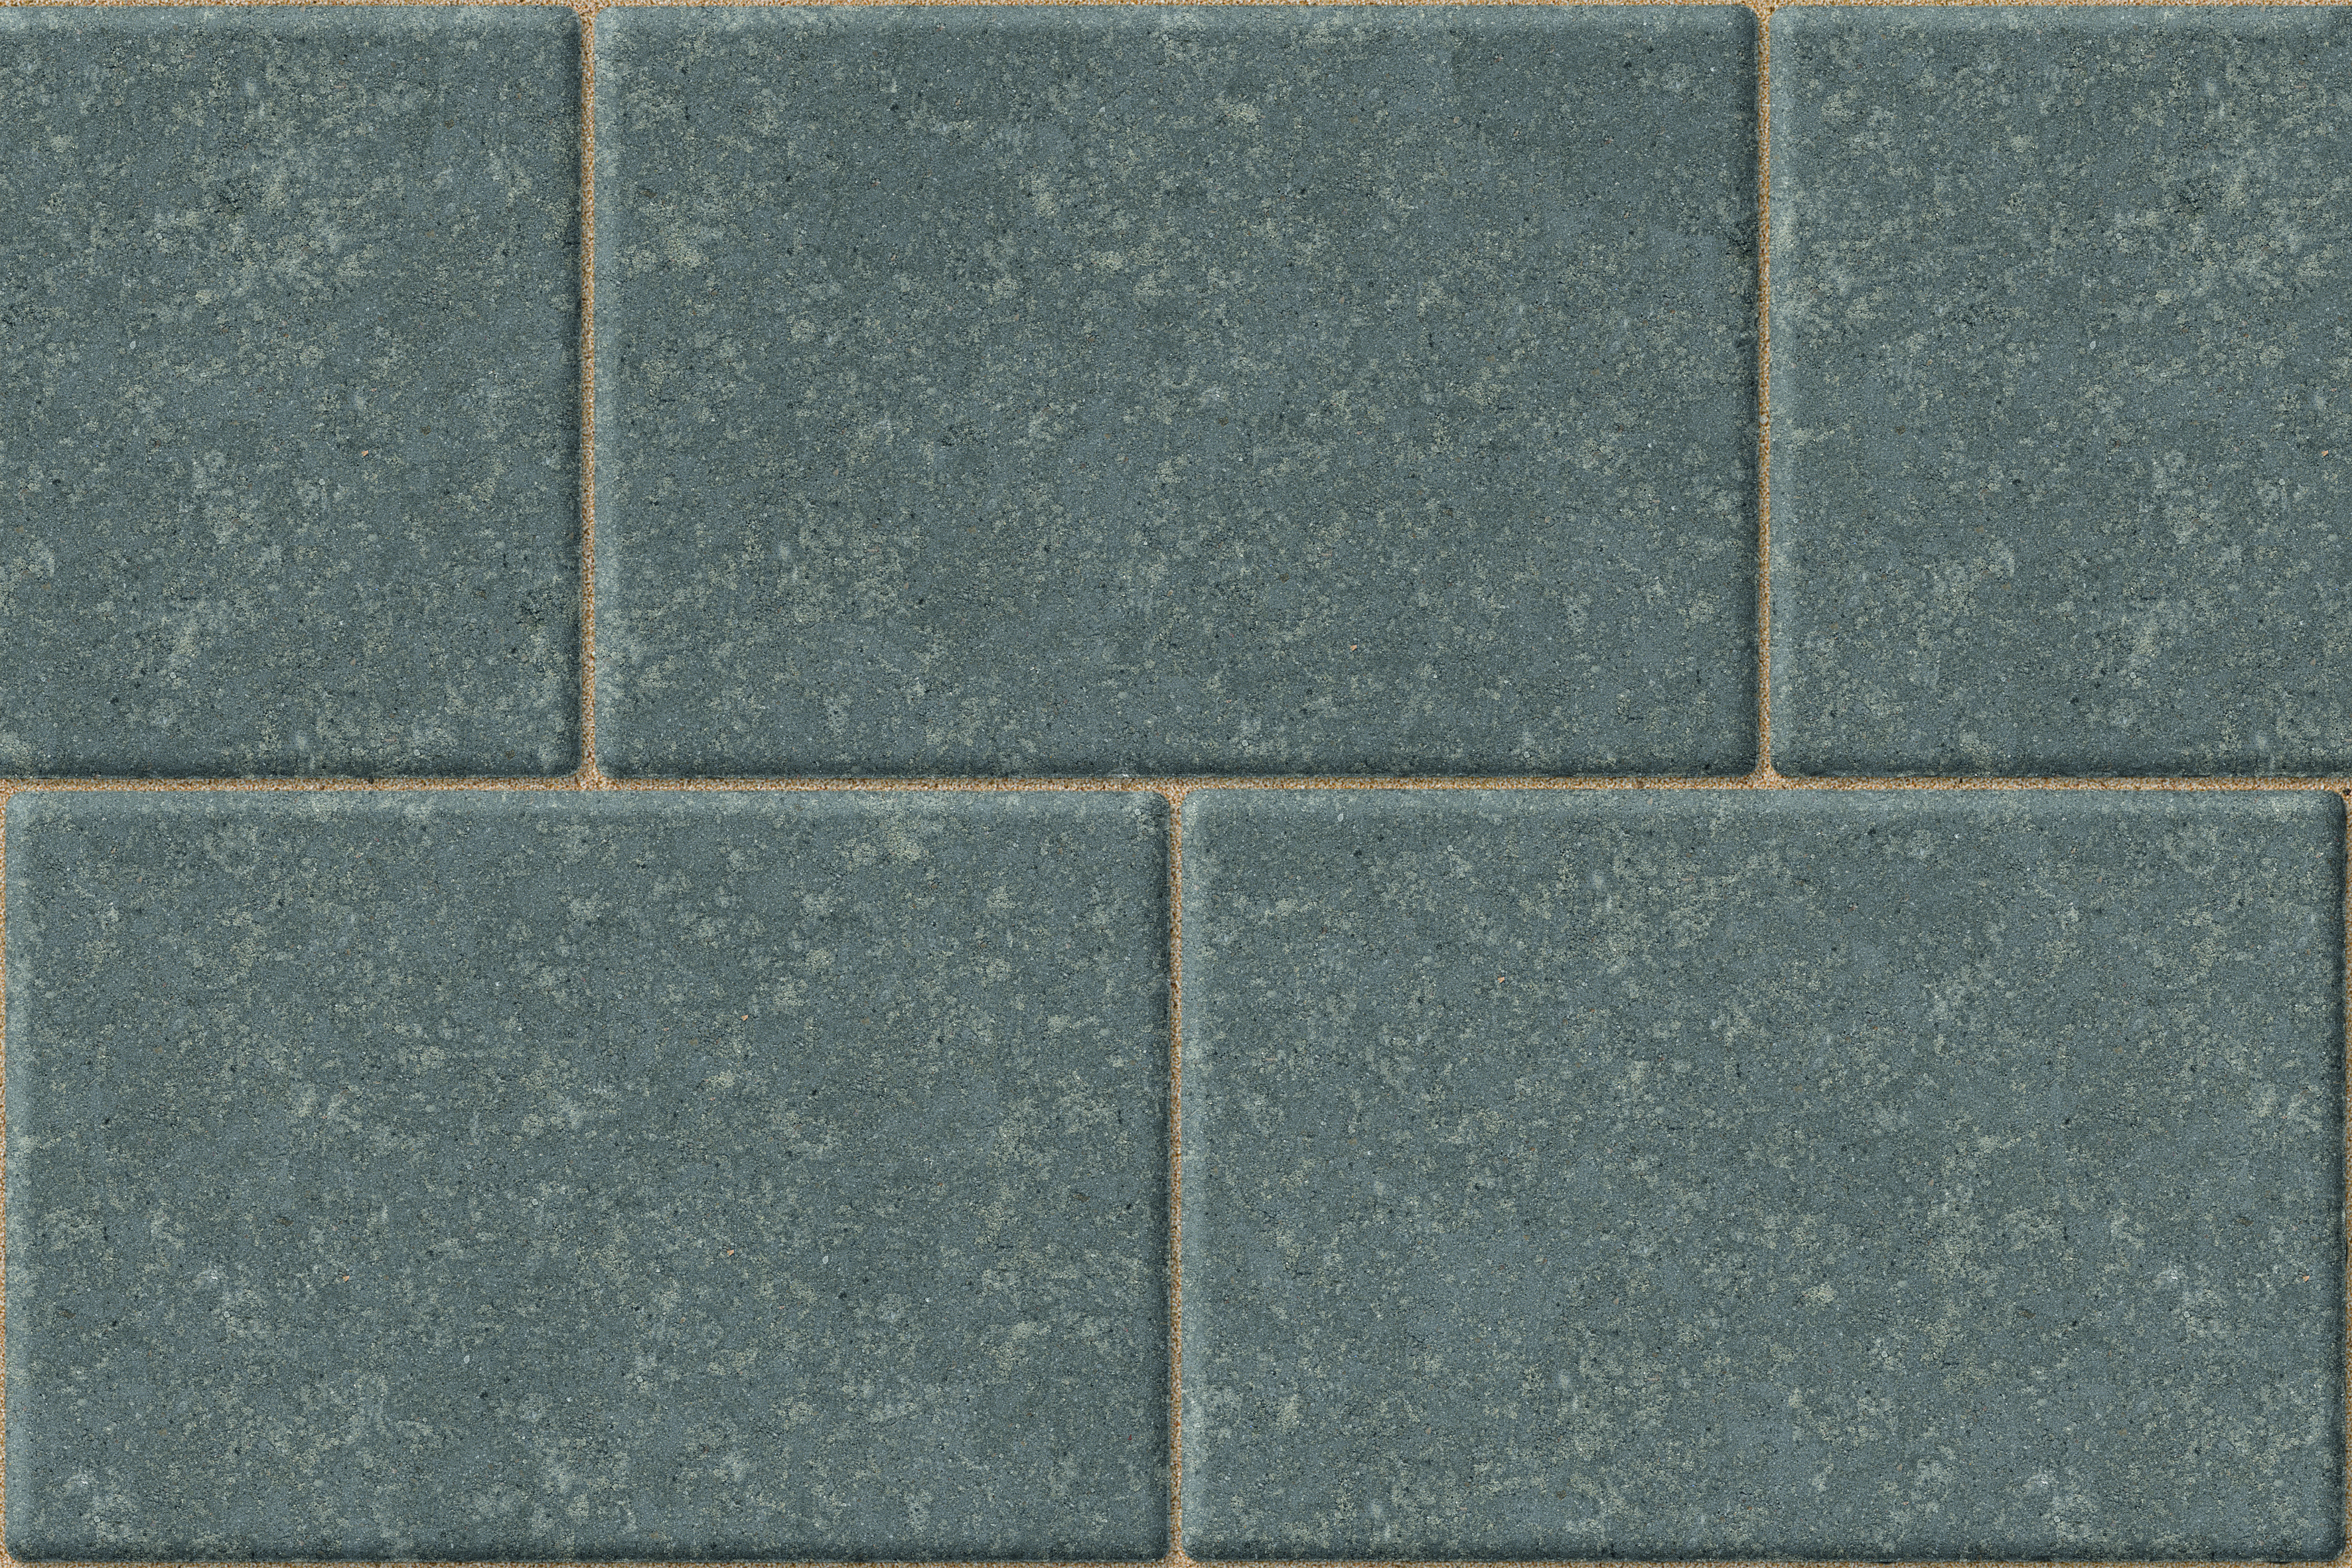 Image of Marshalls Lunar Silver Dust Driveway Block Paving - 300 x 200 x 50mm - Pack of 192